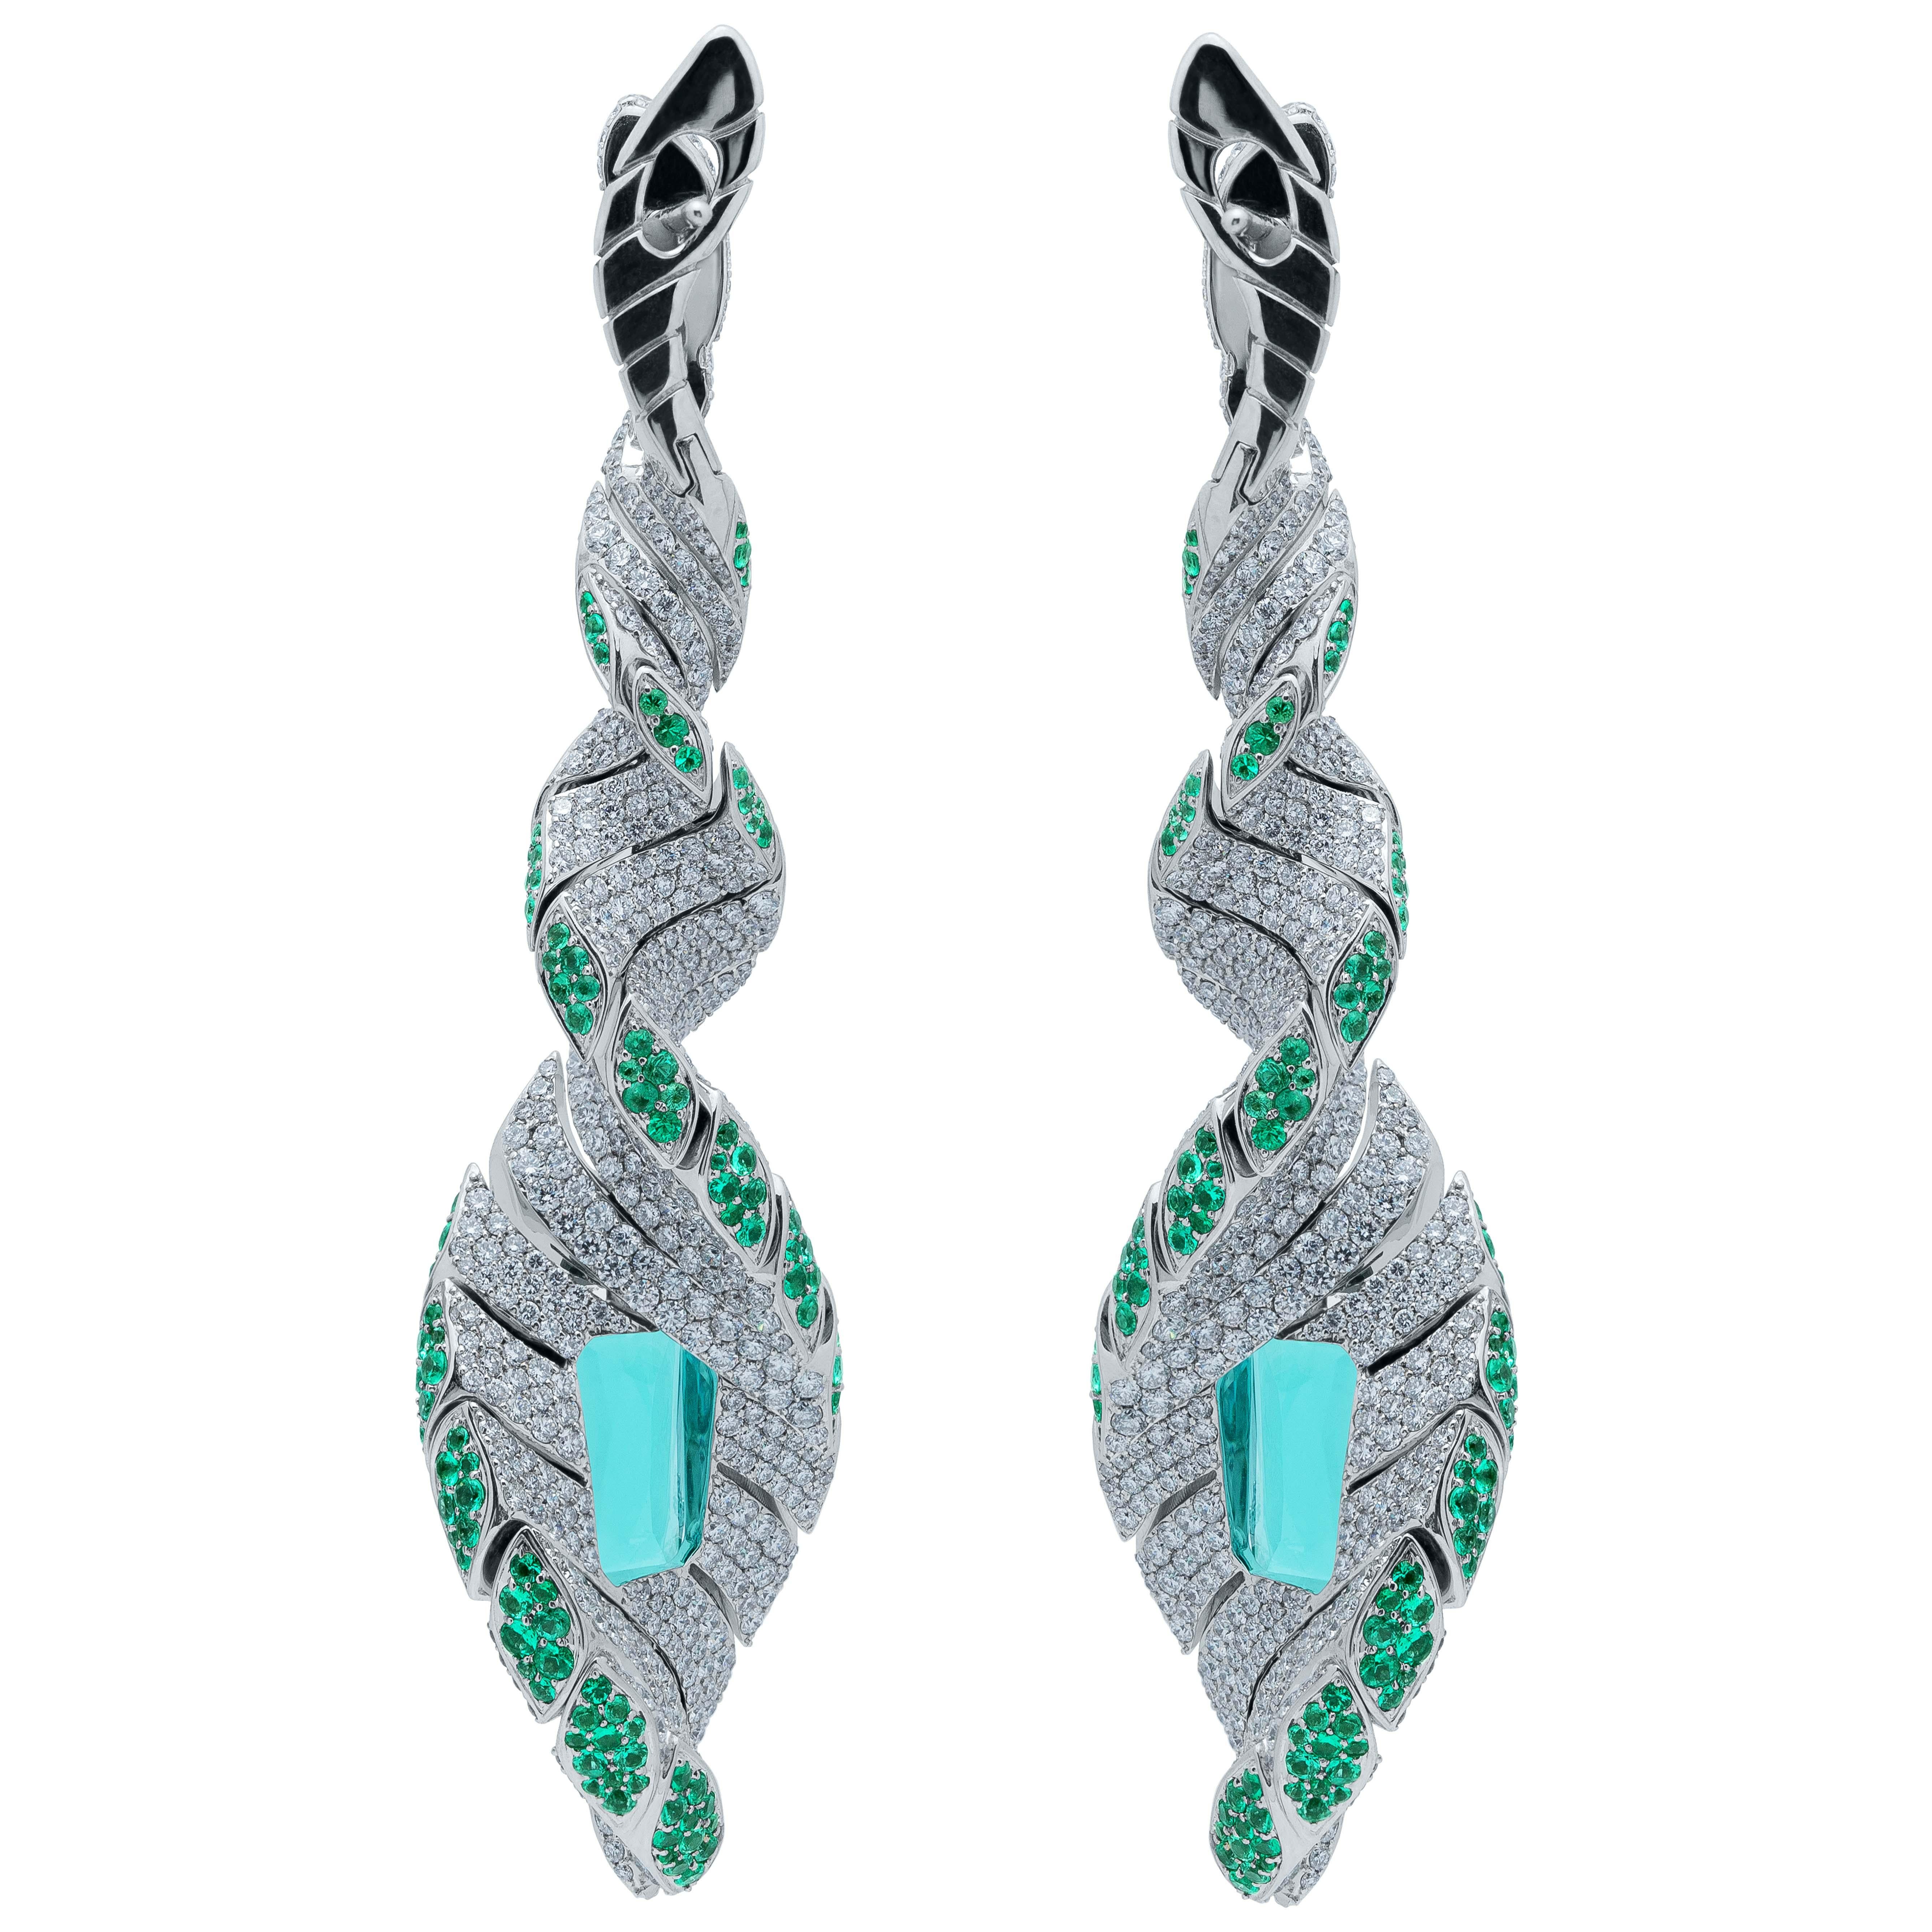 Tourmaline Diamonds Emeralds 18 Karat White Gold DNA Earrings
In the shape of these Earrings, you probably already guessed that when they were created, our designers were inspired by the structure of human DNA. What could be more perfect? But not